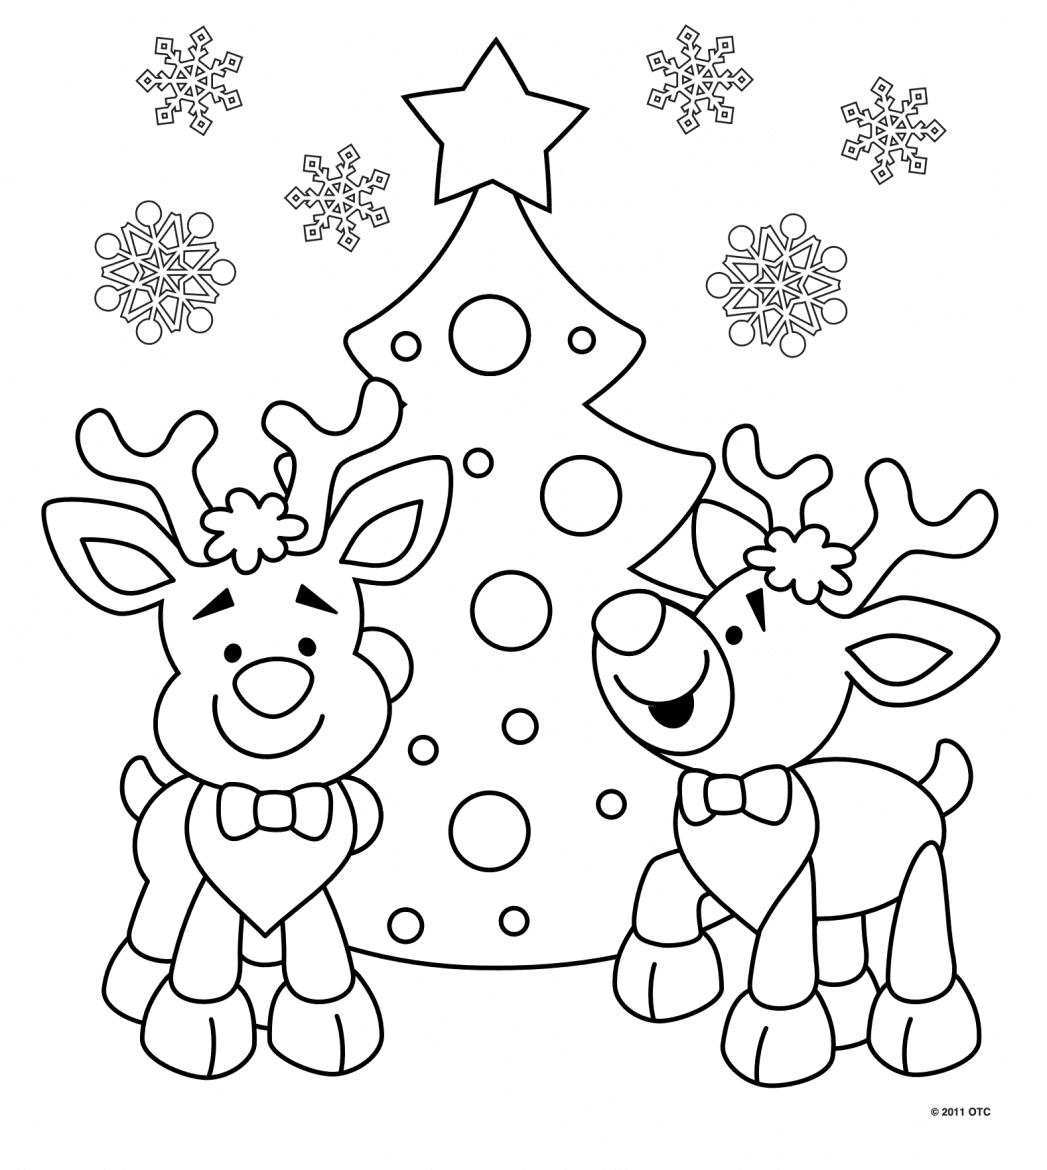 Christmas Cute For Children Coloring Page